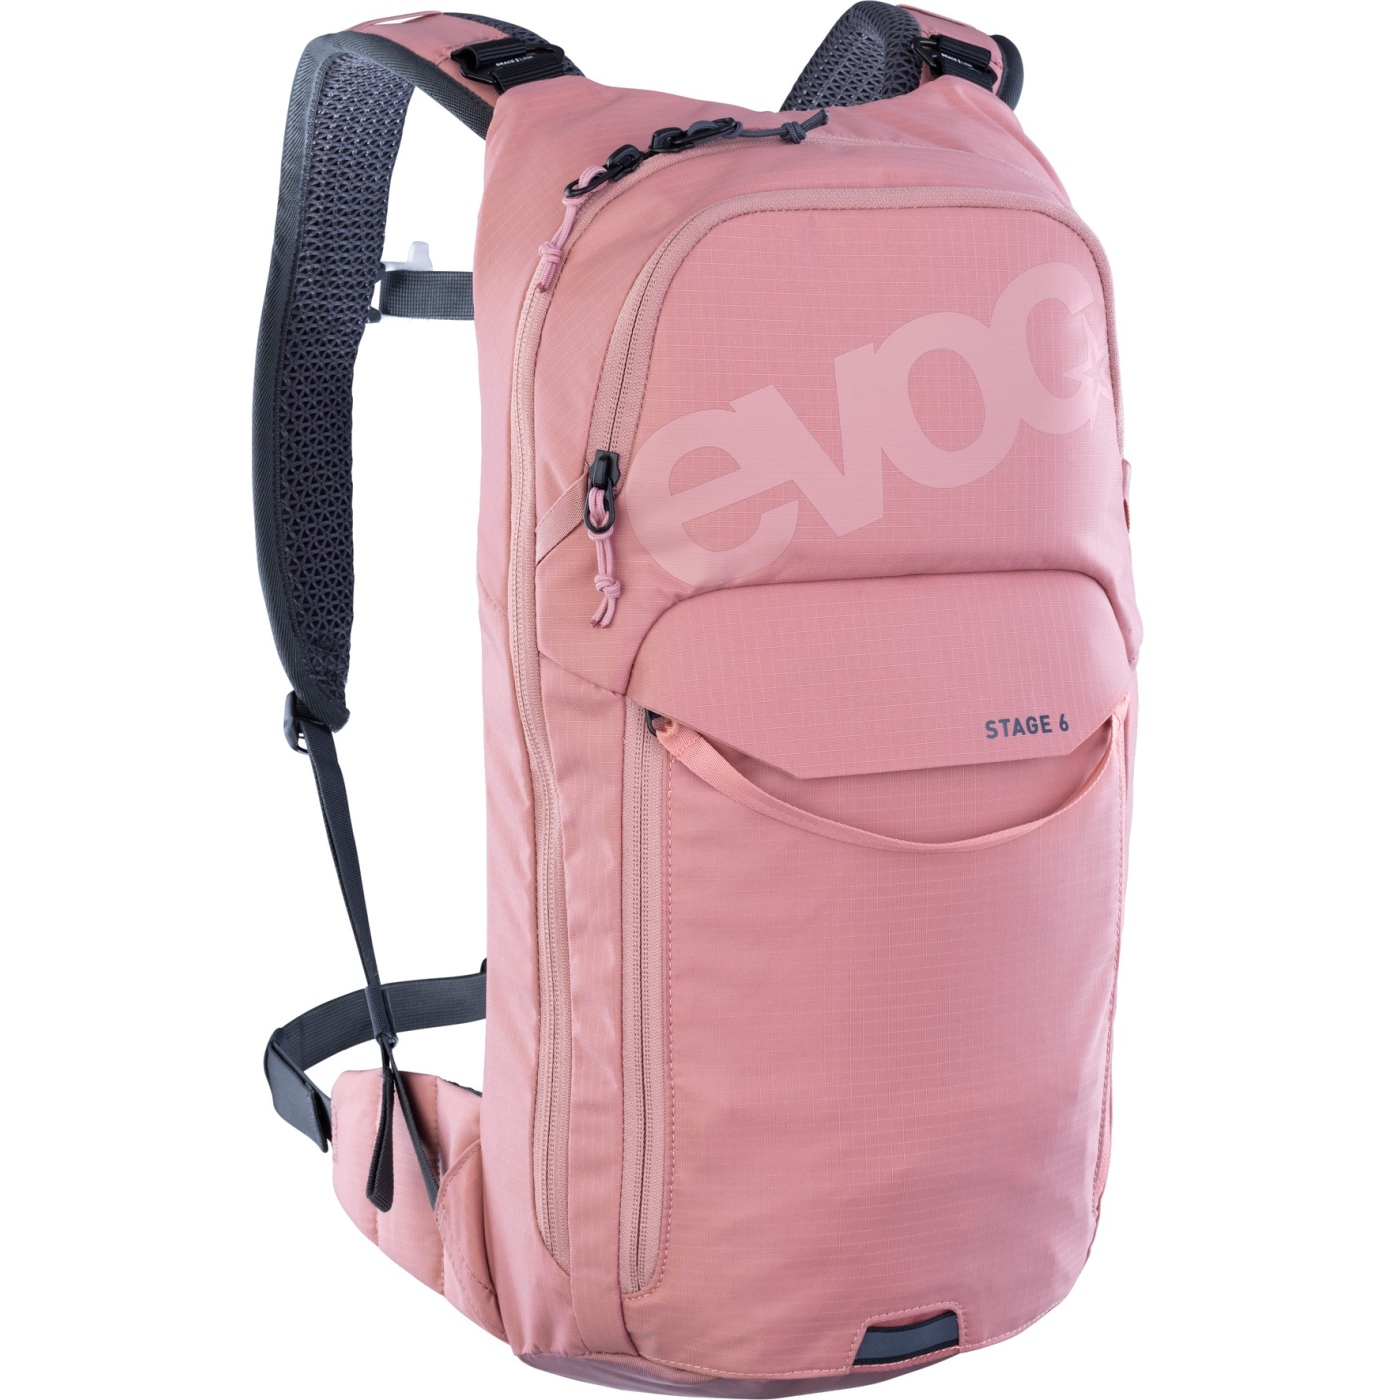 Picture of EVOC Stage Backpack - 6 L - Dusty Pink